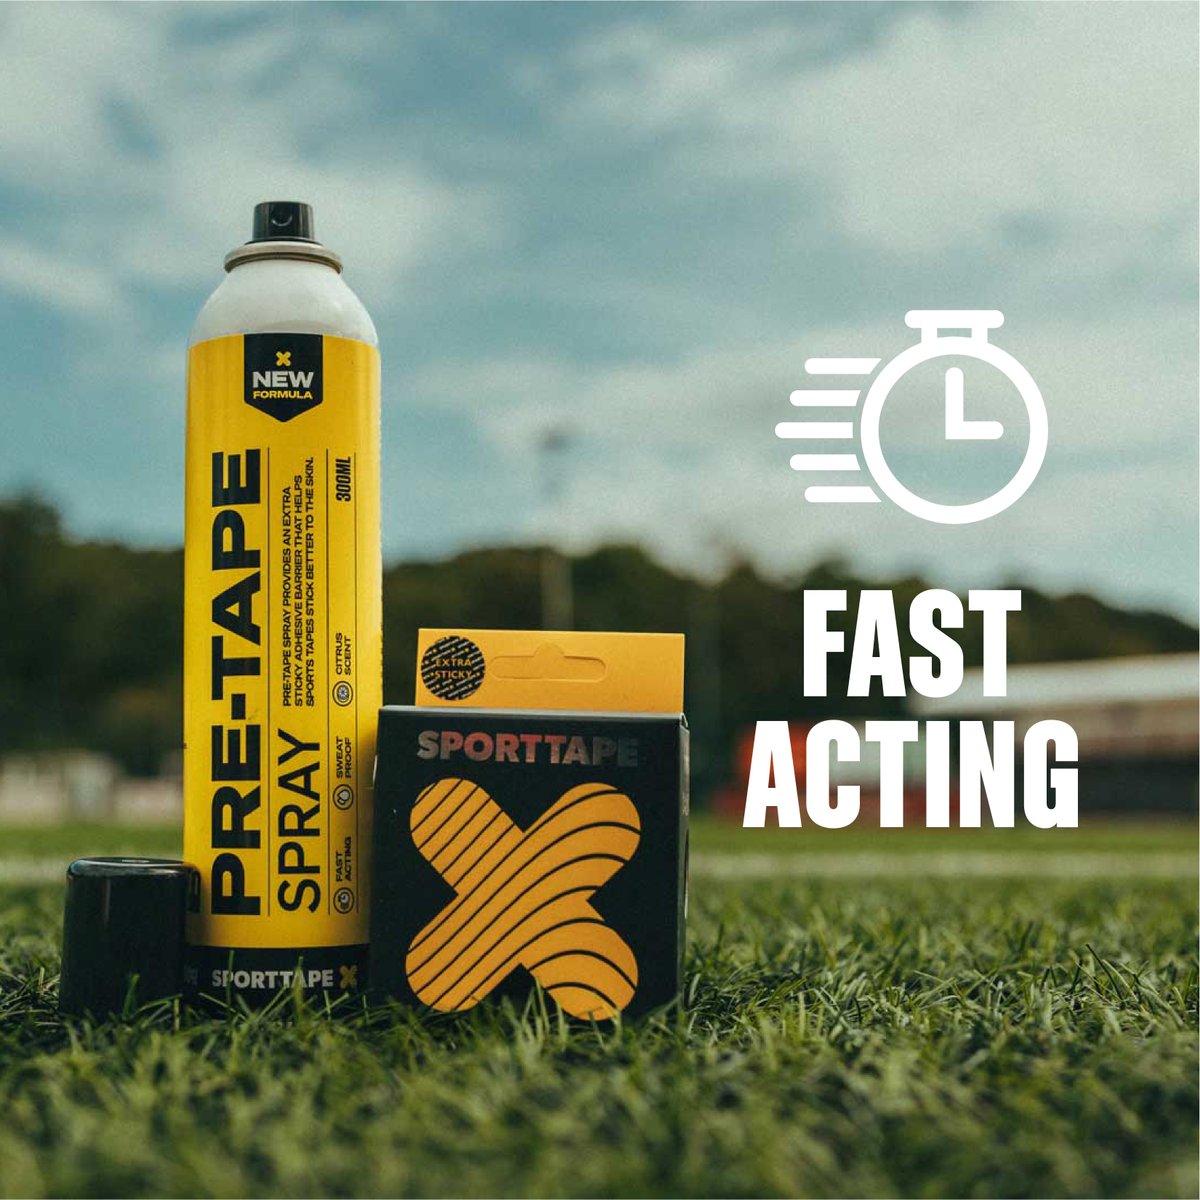 Welcome to your tapes' new best friend 🤝 A saviour in sweaty situations and extreme conditions. 18 months in development and proudly made in the UK 🇬🇧 Our NEW PRE-TAPE SPRAY is bigger (300ml), better and tackier than before 🙌 sporttape.co.uk/product/pre-ta…